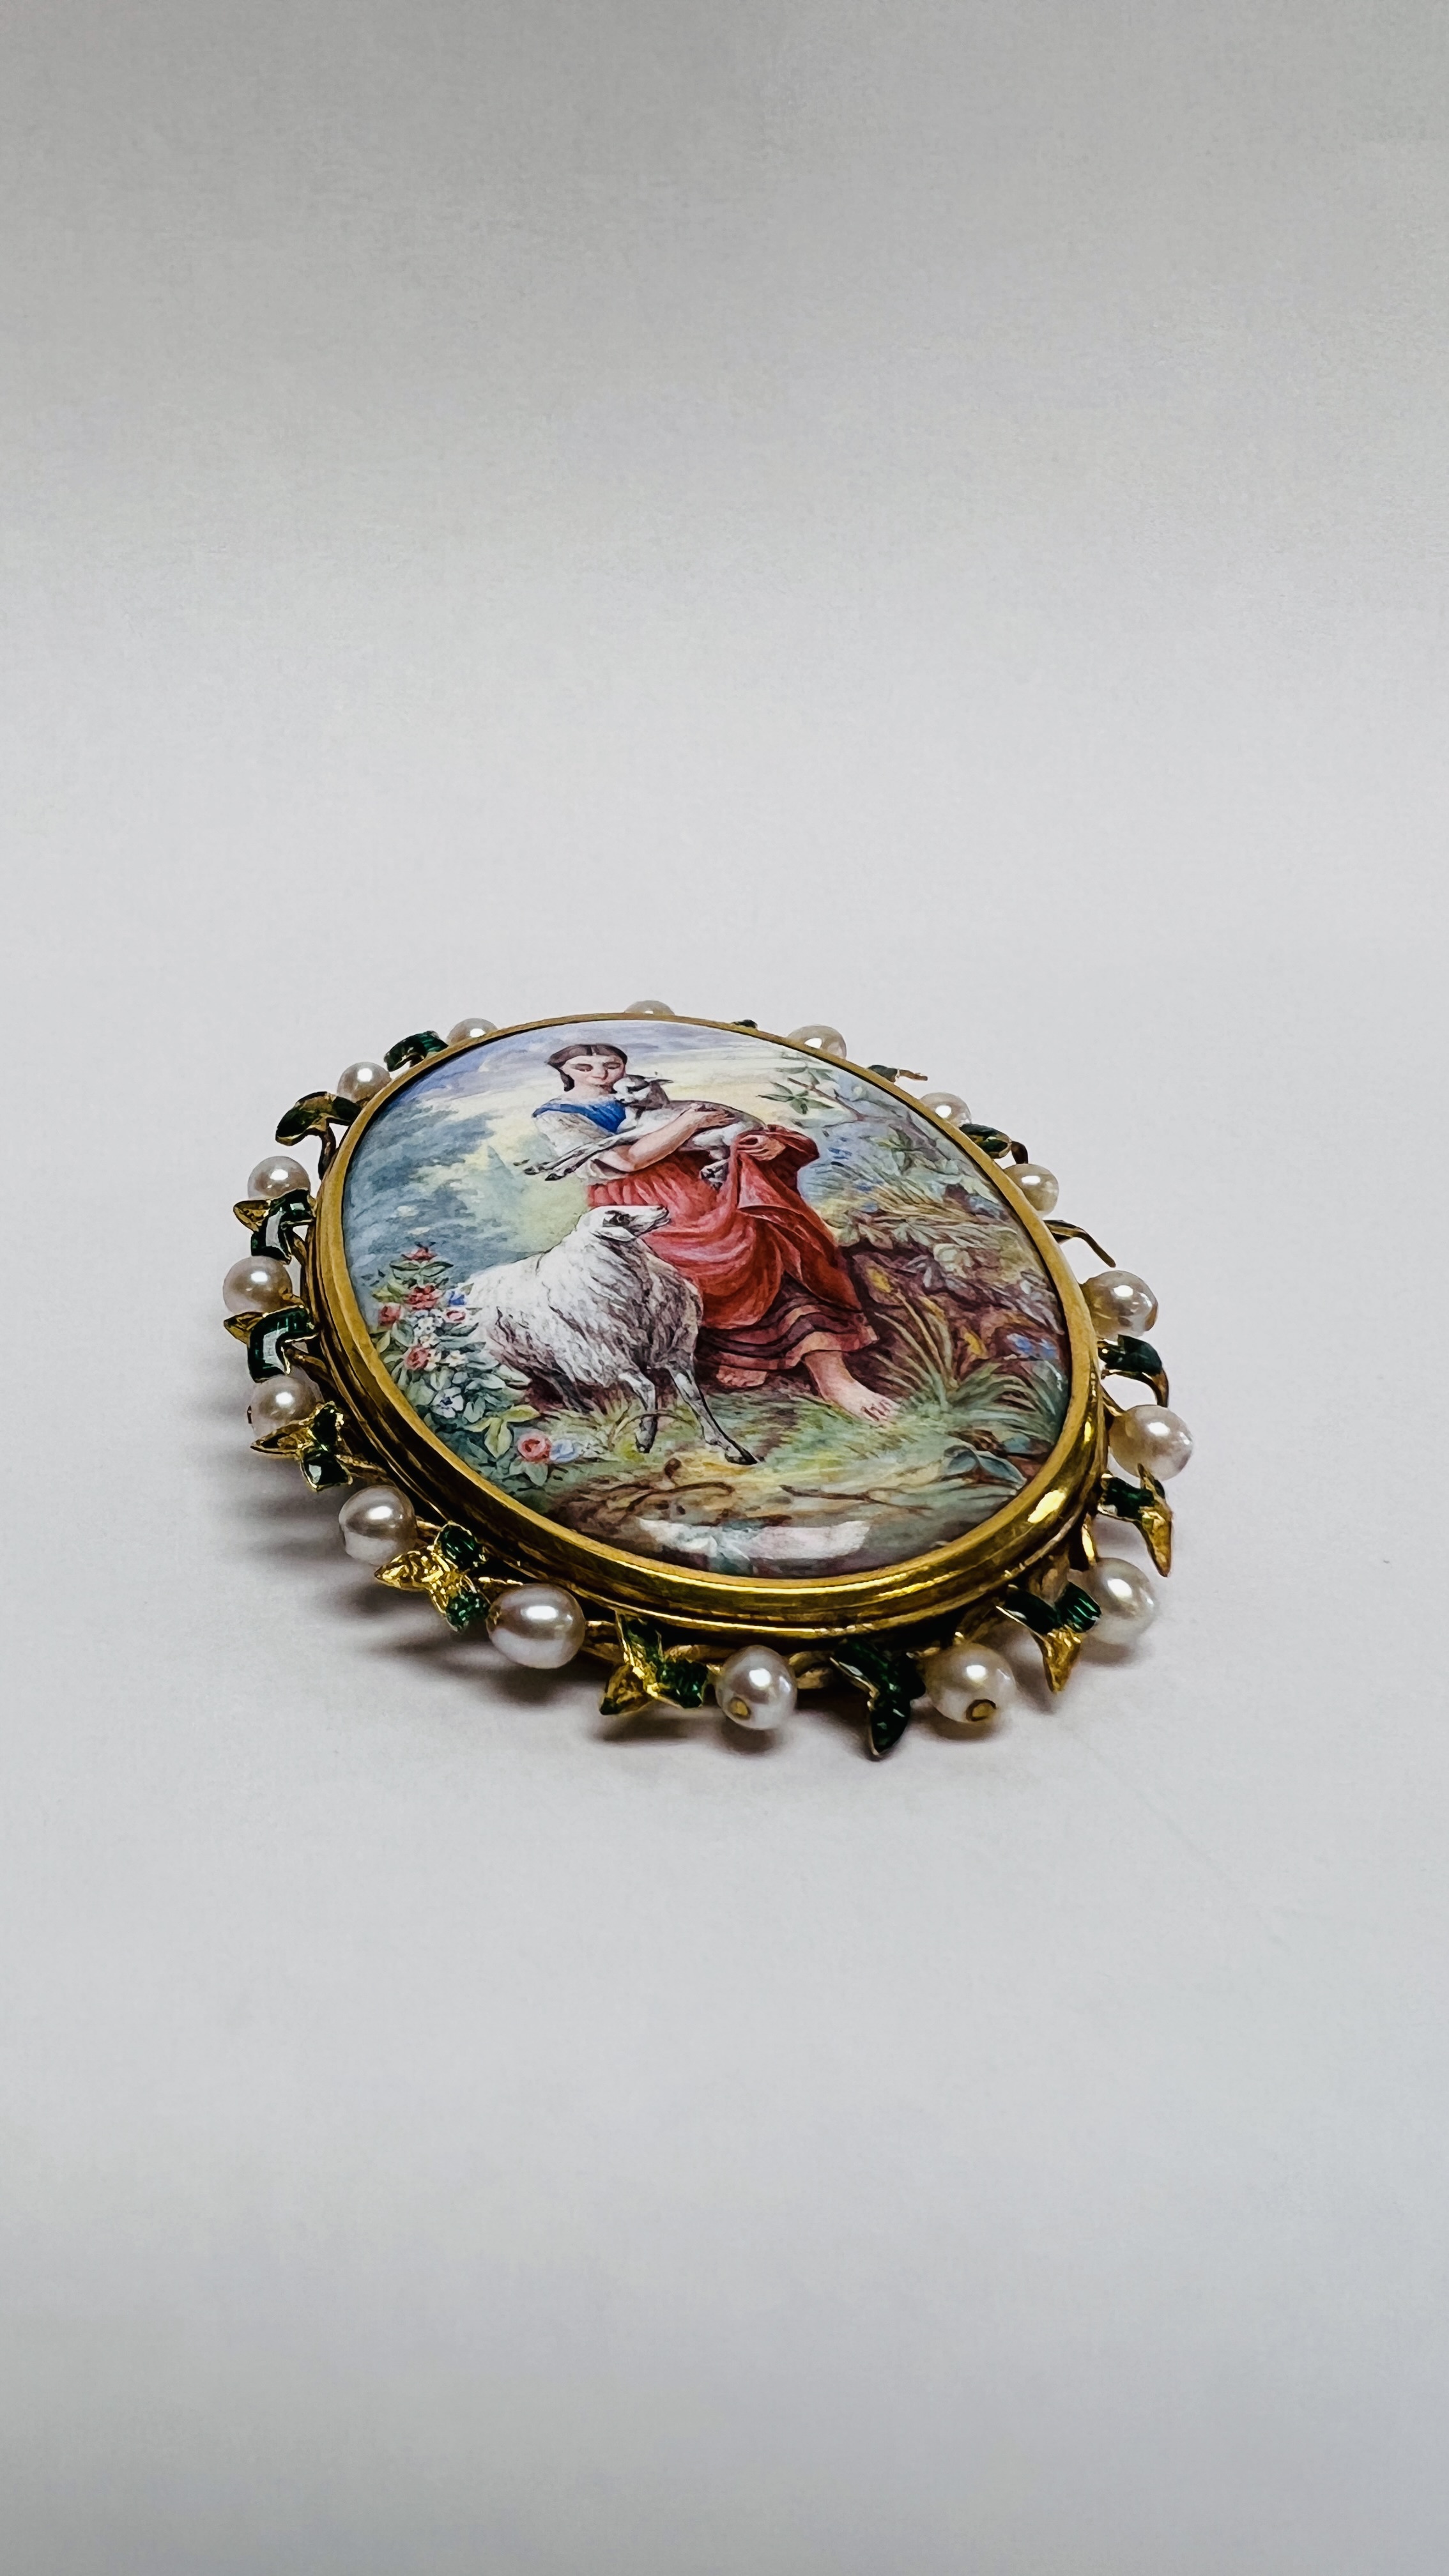 A VINTAGE YELLOW METAL OVAL PORCELAIN PENDANT BROOCH SURROUNDED BY SEED PEARL AND ENAMELLED DETAIL - Image 3 of 8